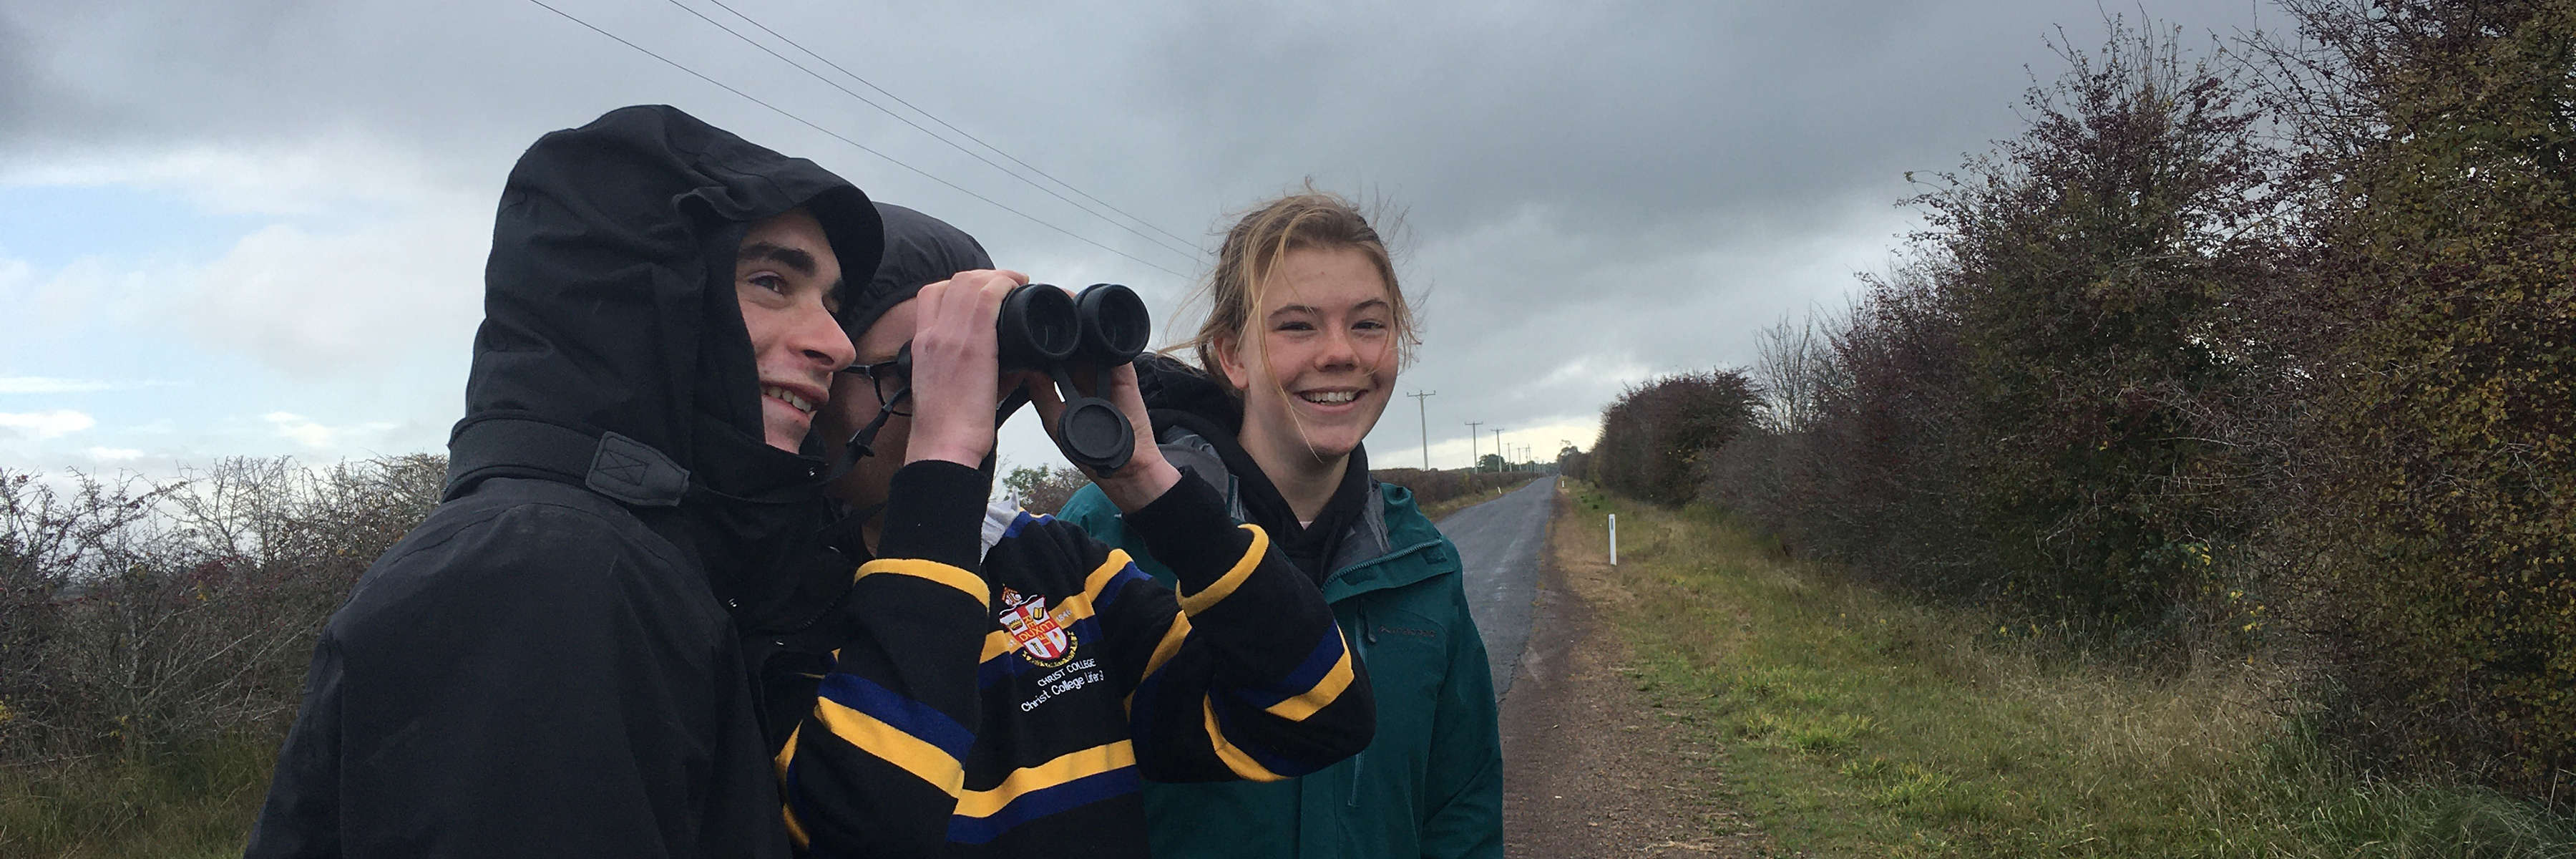 Three university students on a roadside in an agricultural area pose for the camera after a 10-minute Where? Where? Wedgie! survey. One of them is looking to the sky with binoculars. Photo: Katherine Stuart.